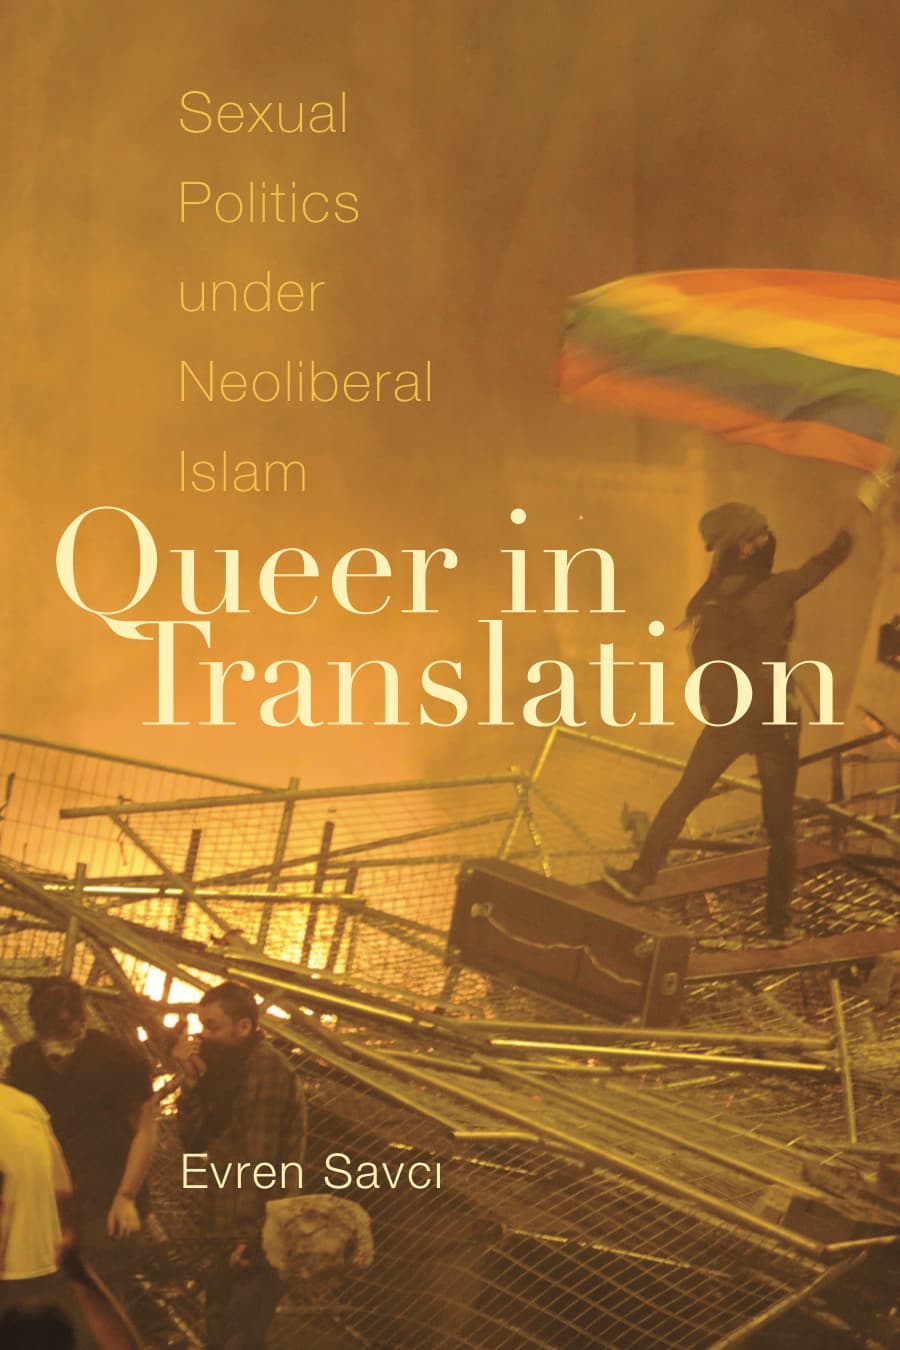 Image of Dr. Evern Savci's Queer In Translation: Sexual Politics under Islam book